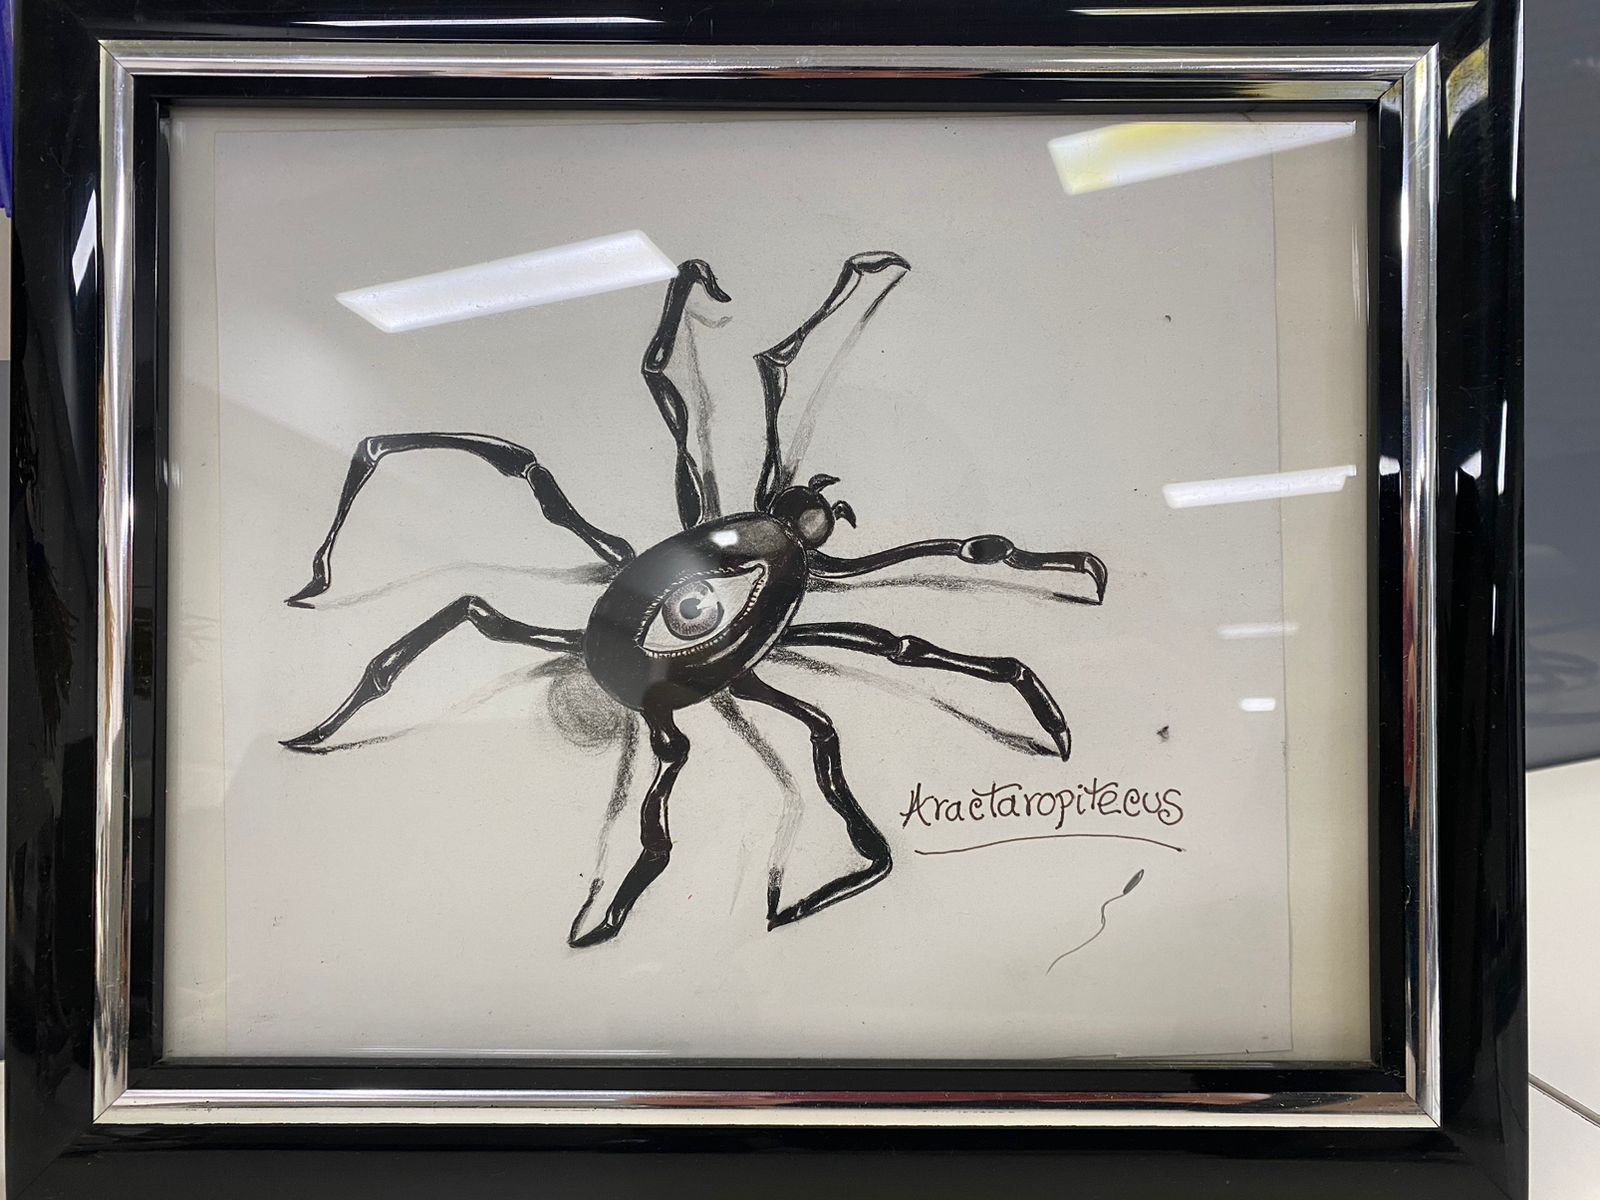 A spider painted in a real painting